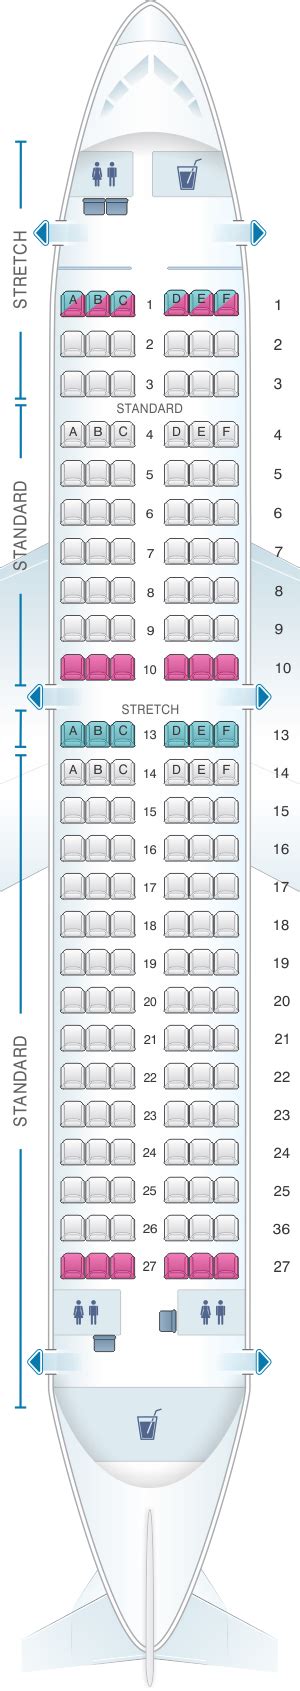 Airbus A320 Frontier Seat Map